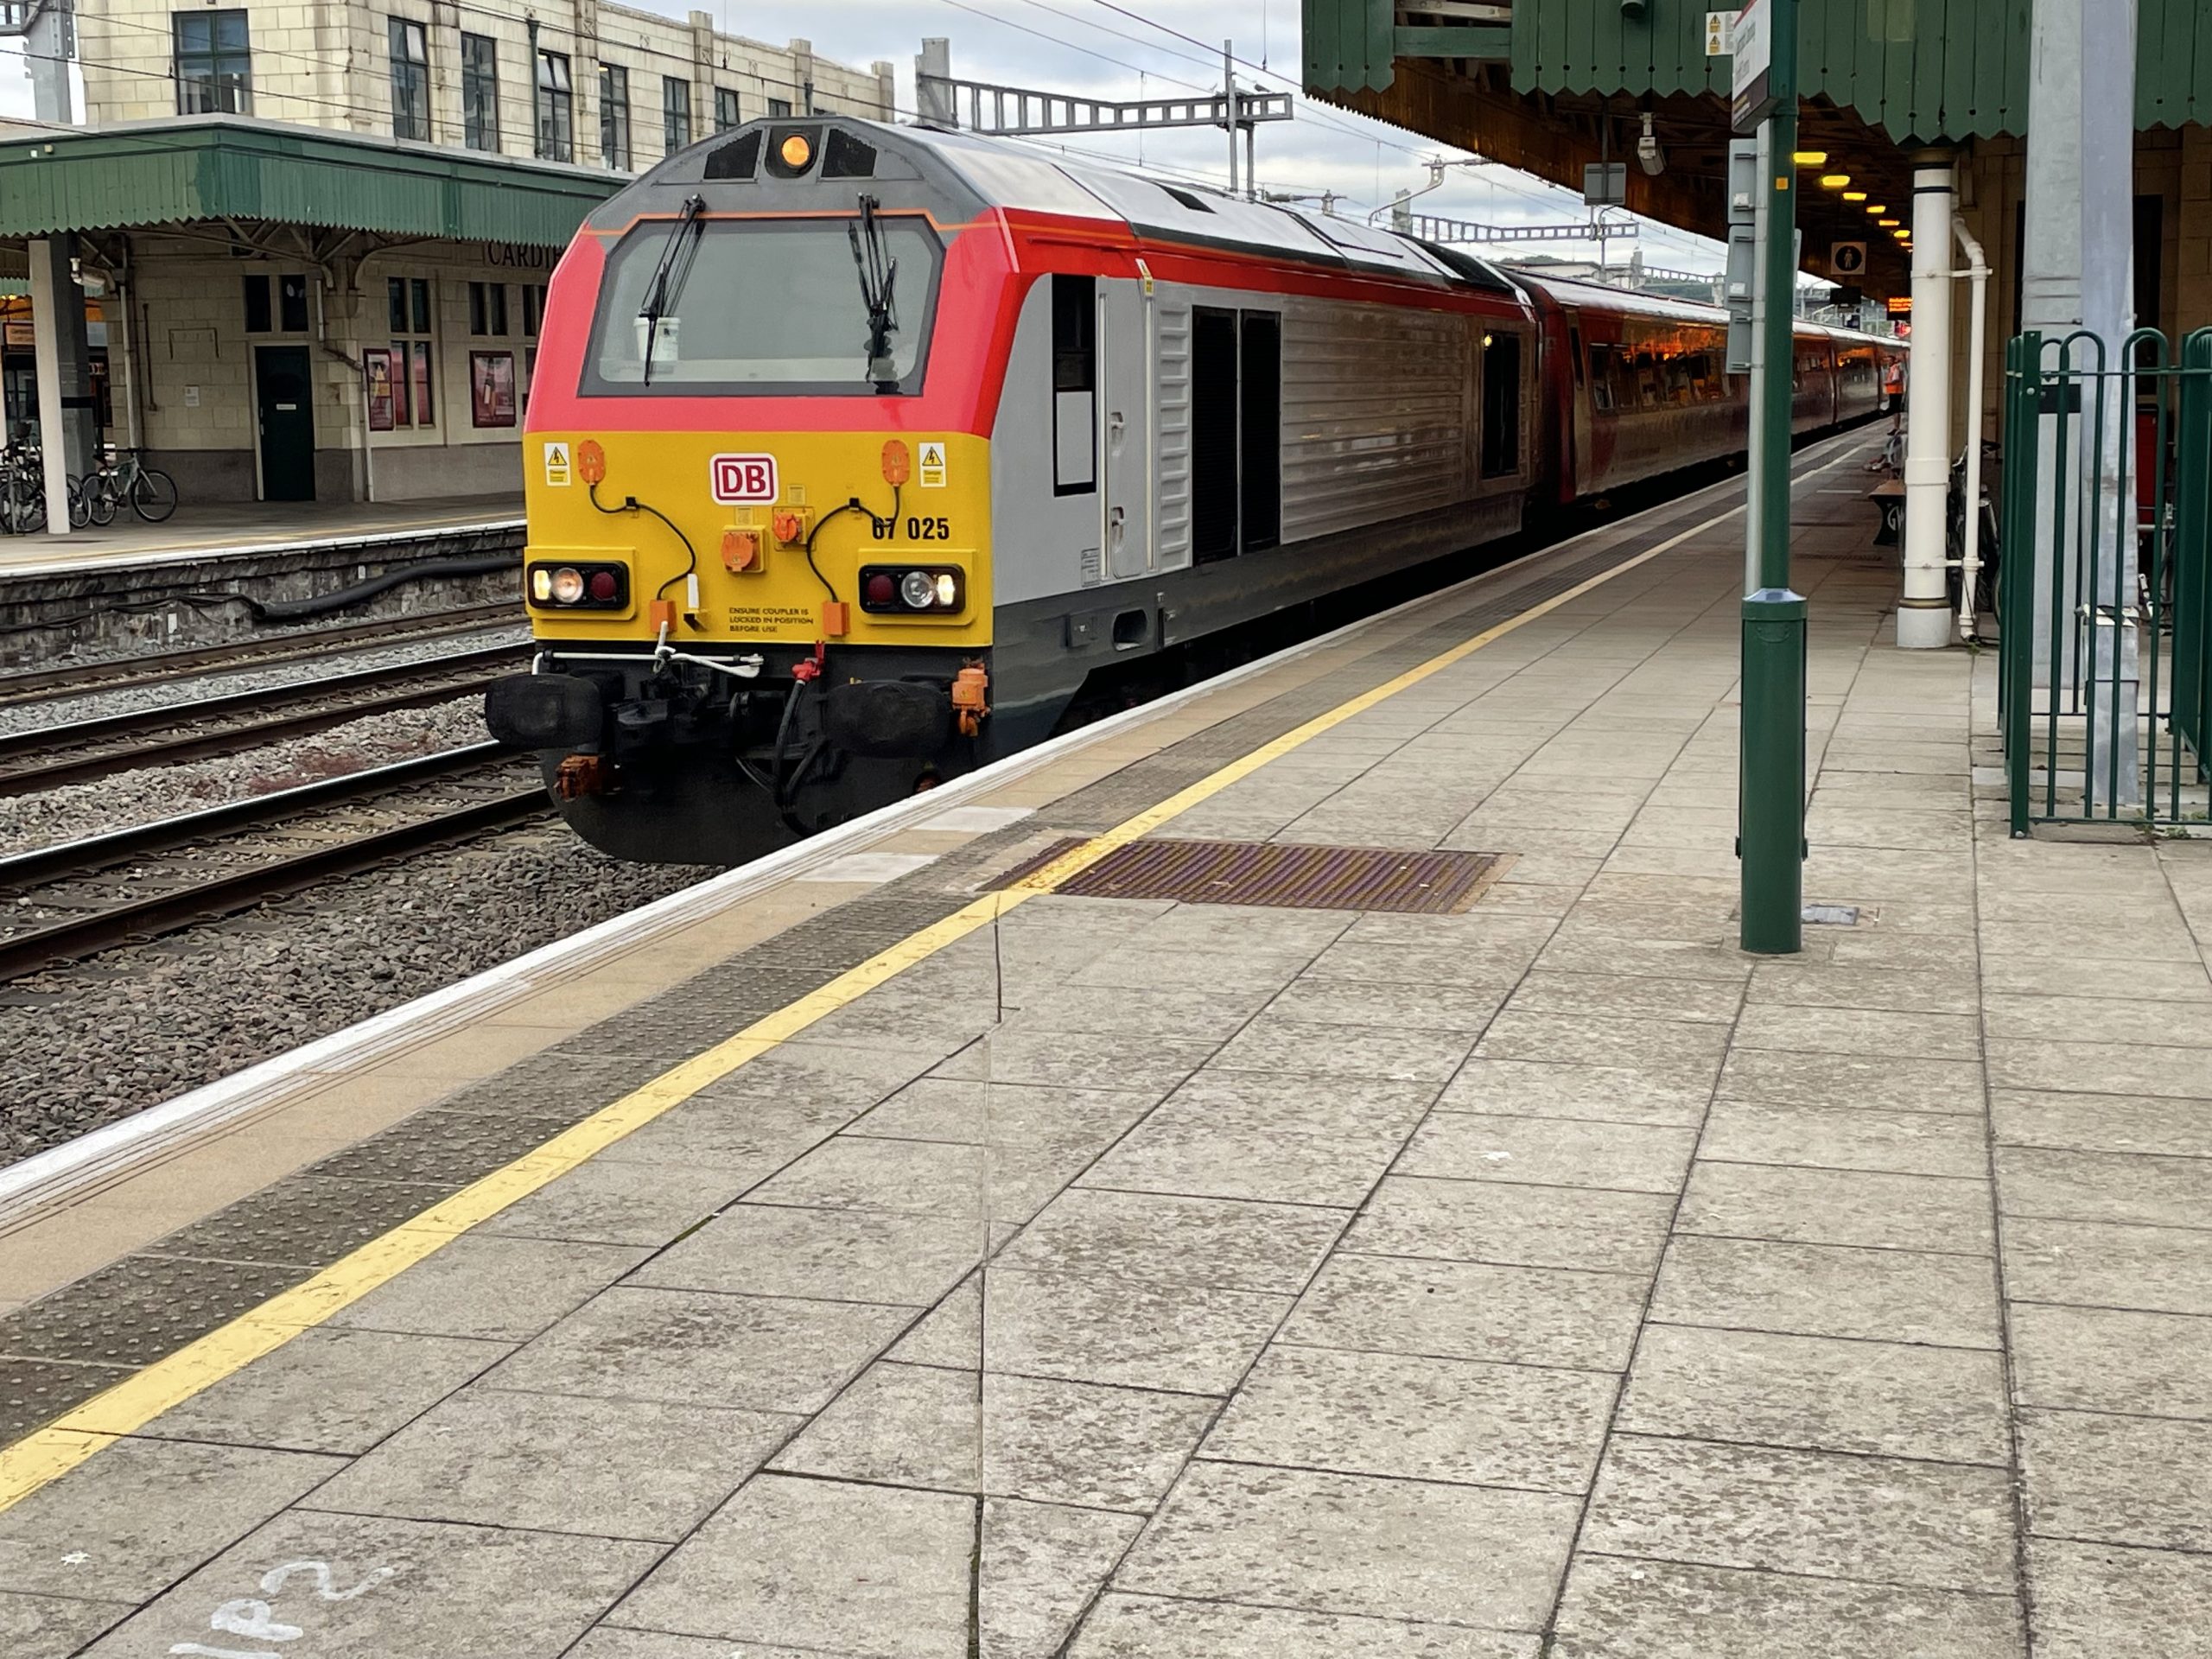 67025 awaiting departure from Cardiff Central with 1V91 to Holyhead on 7 July 2022